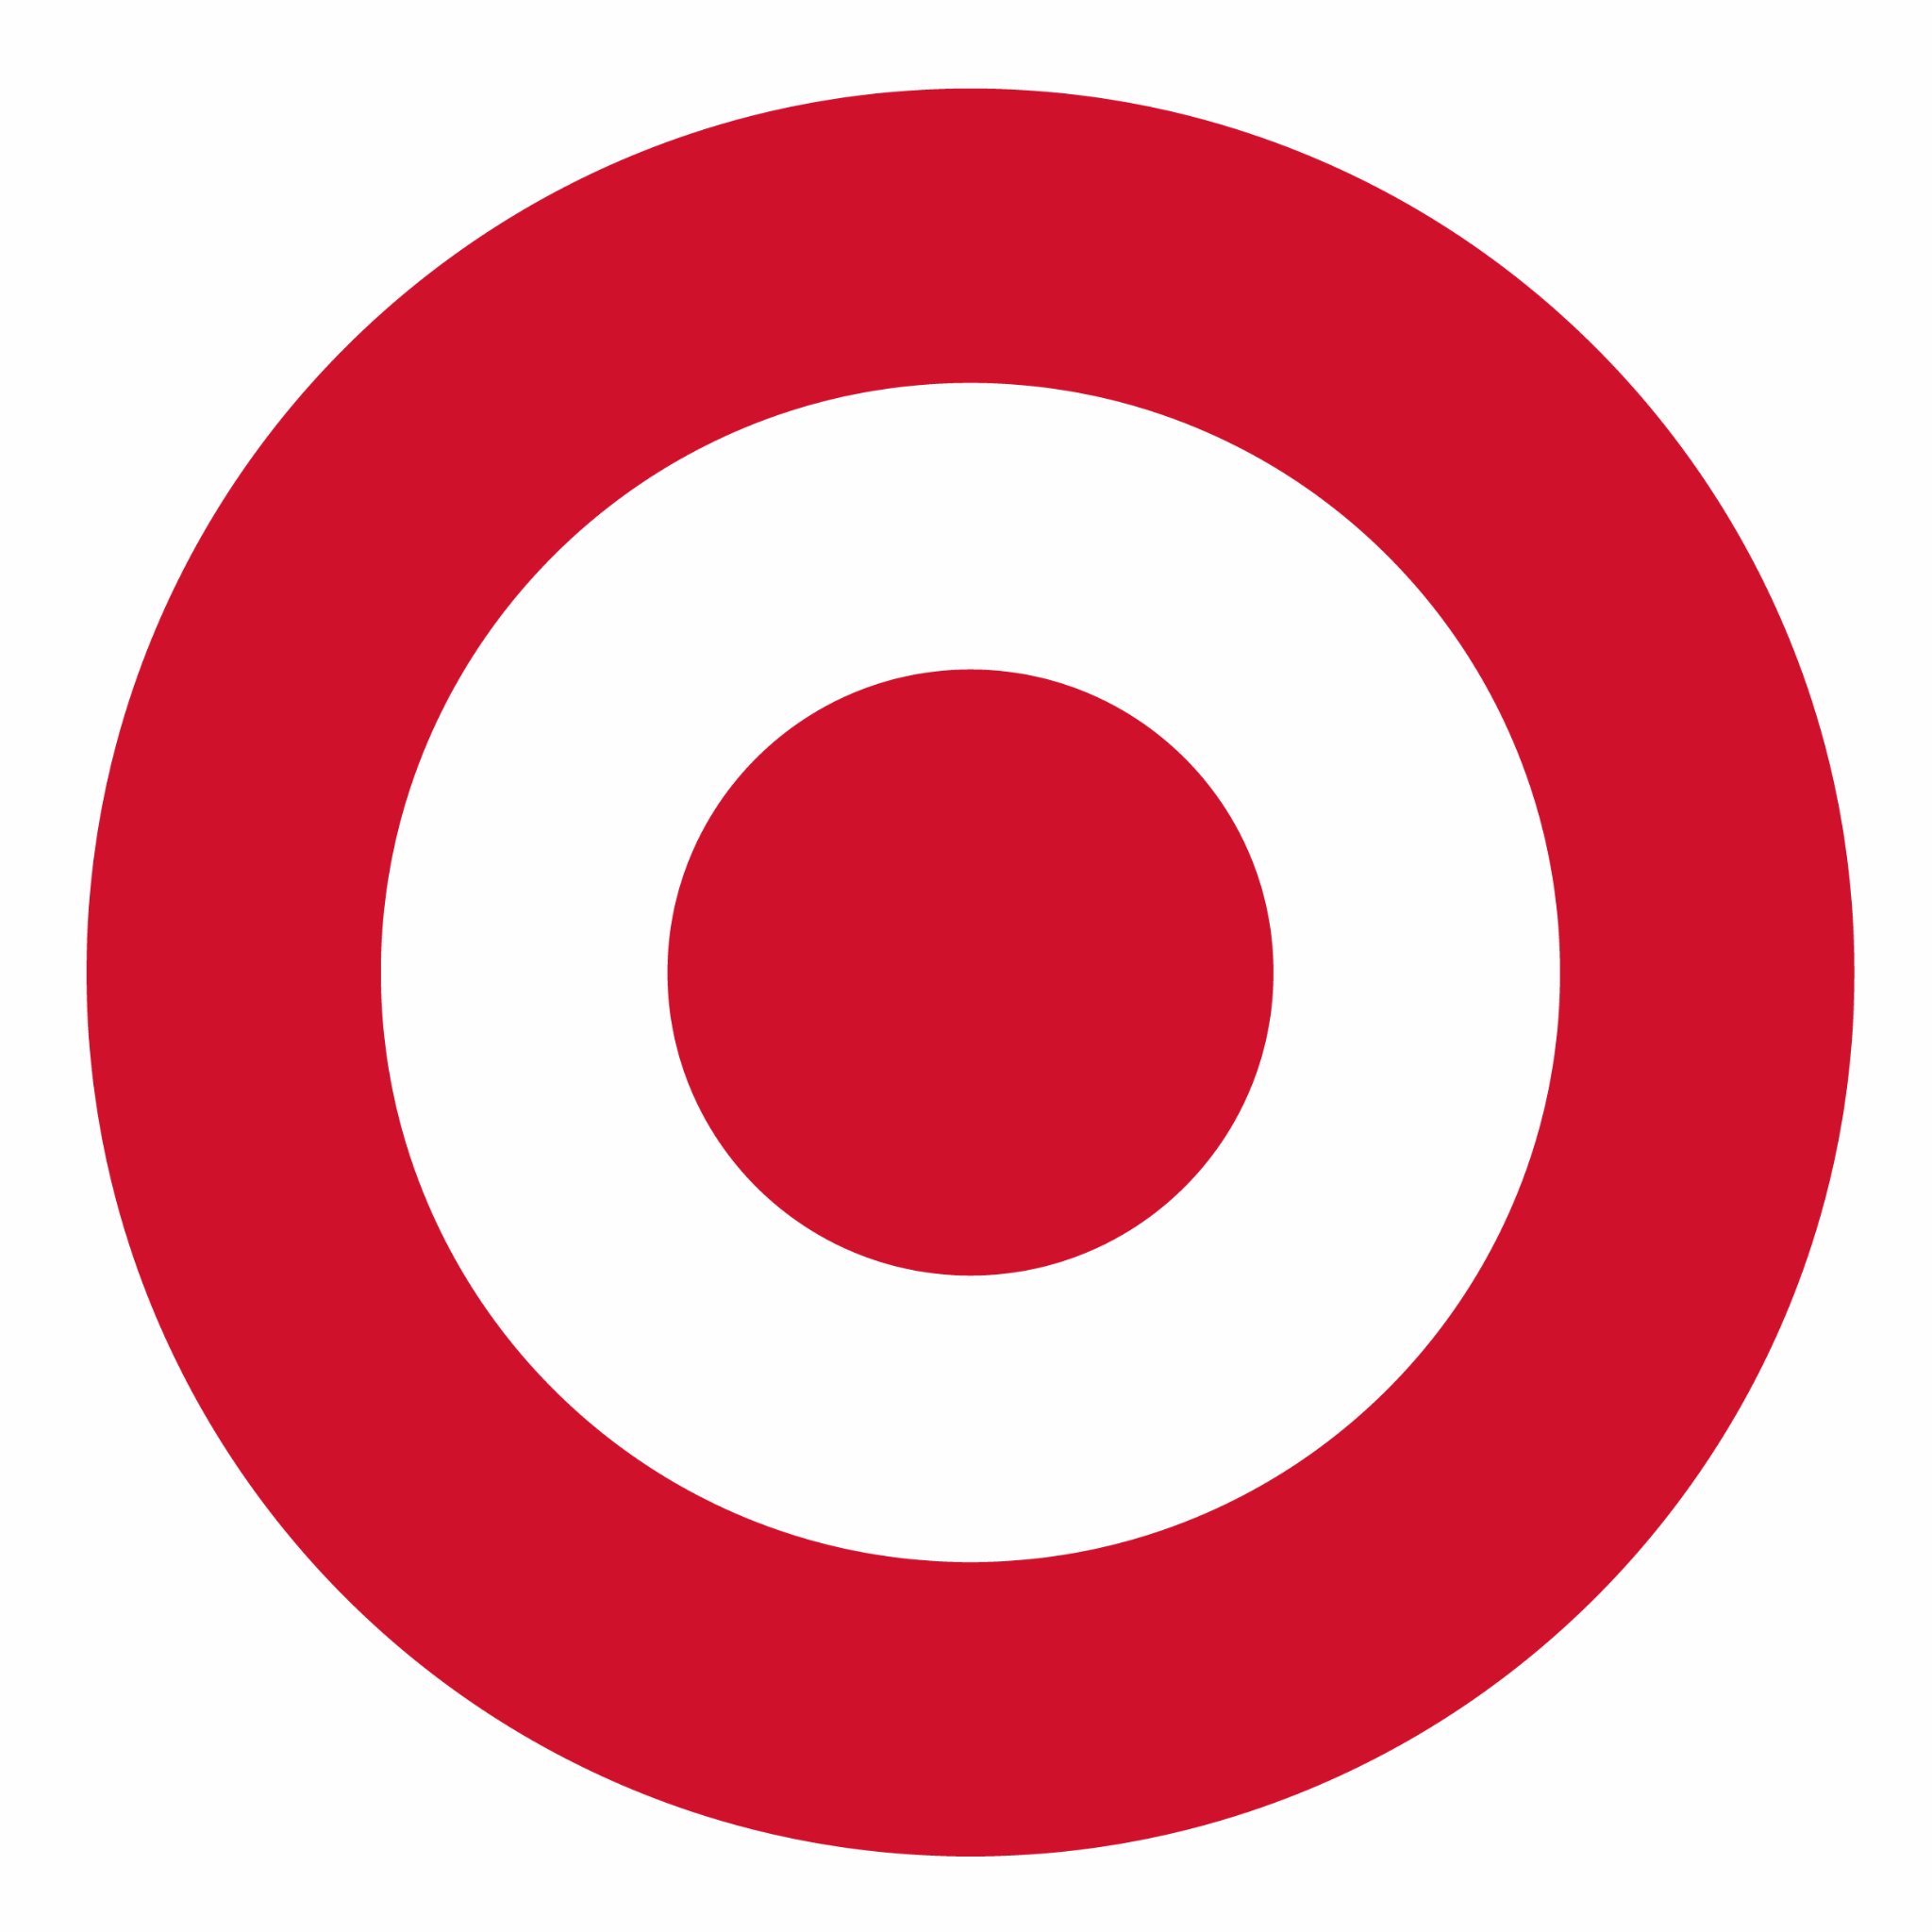 The official handle for Target in India company news, partnerships, careers, events and more.